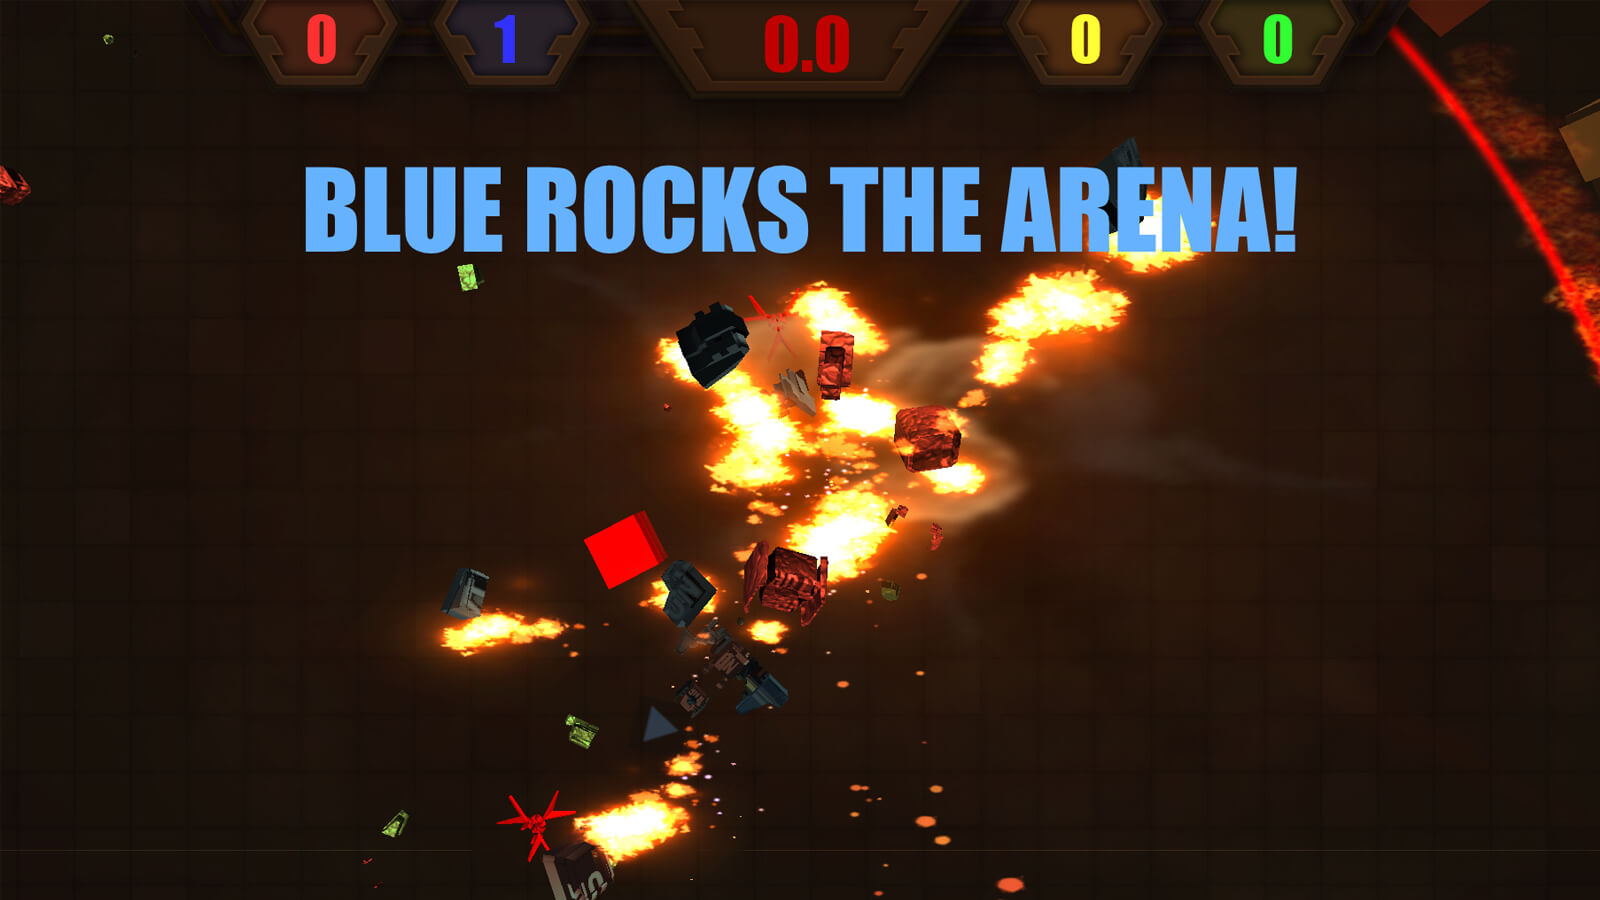 An explosion of vehicle parts with the message "BLUE ROCKS THE ARENA" on the screen.